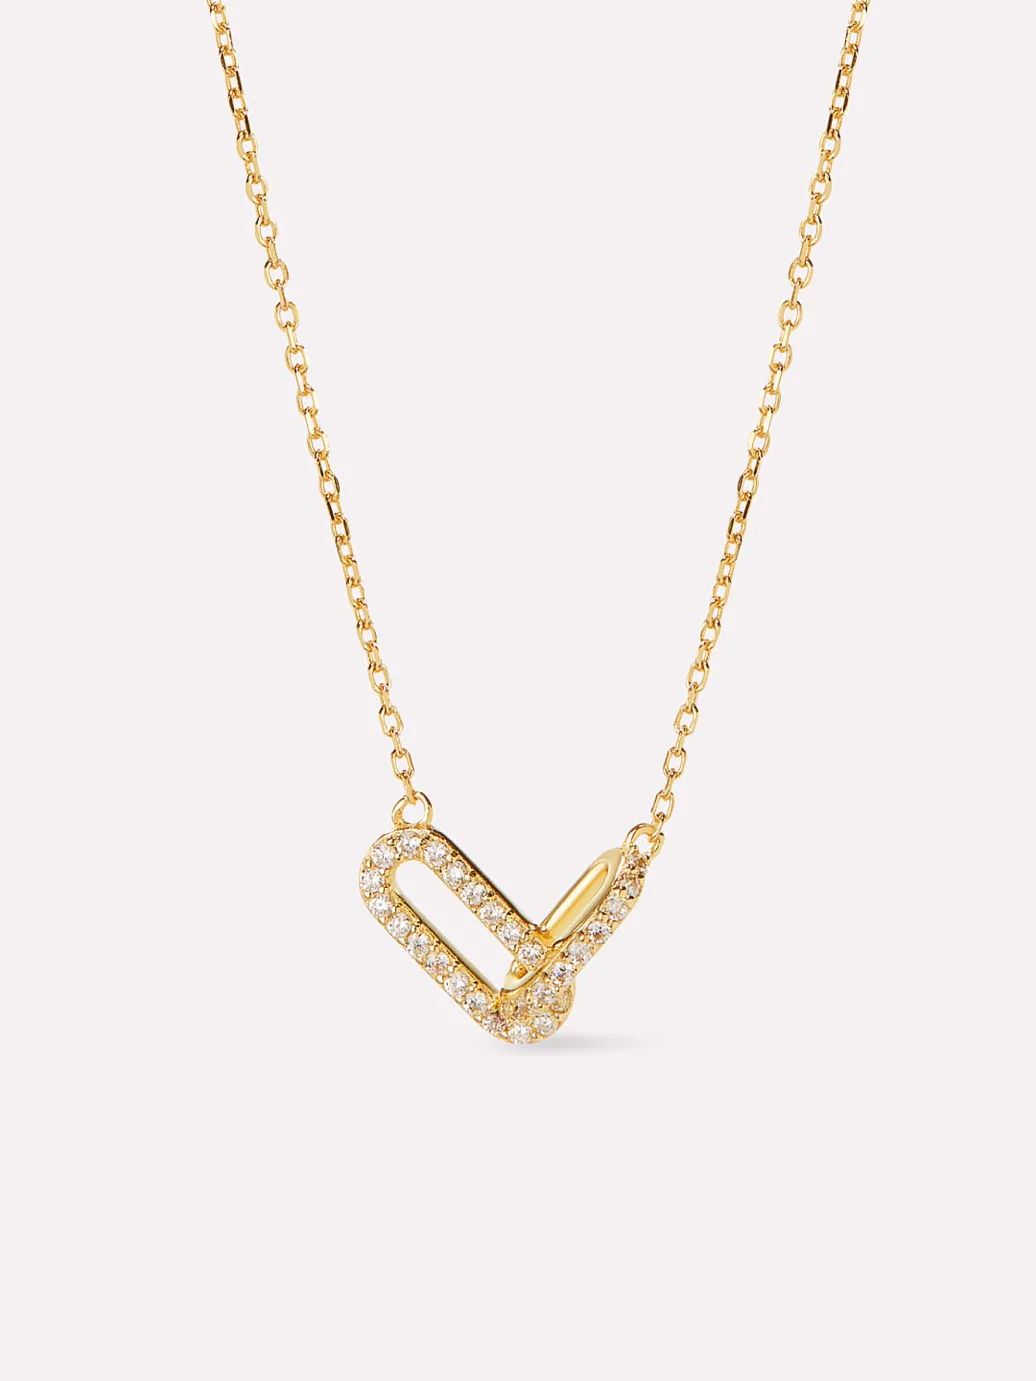 Chain Link Necklace - Loree | Ana Luisa